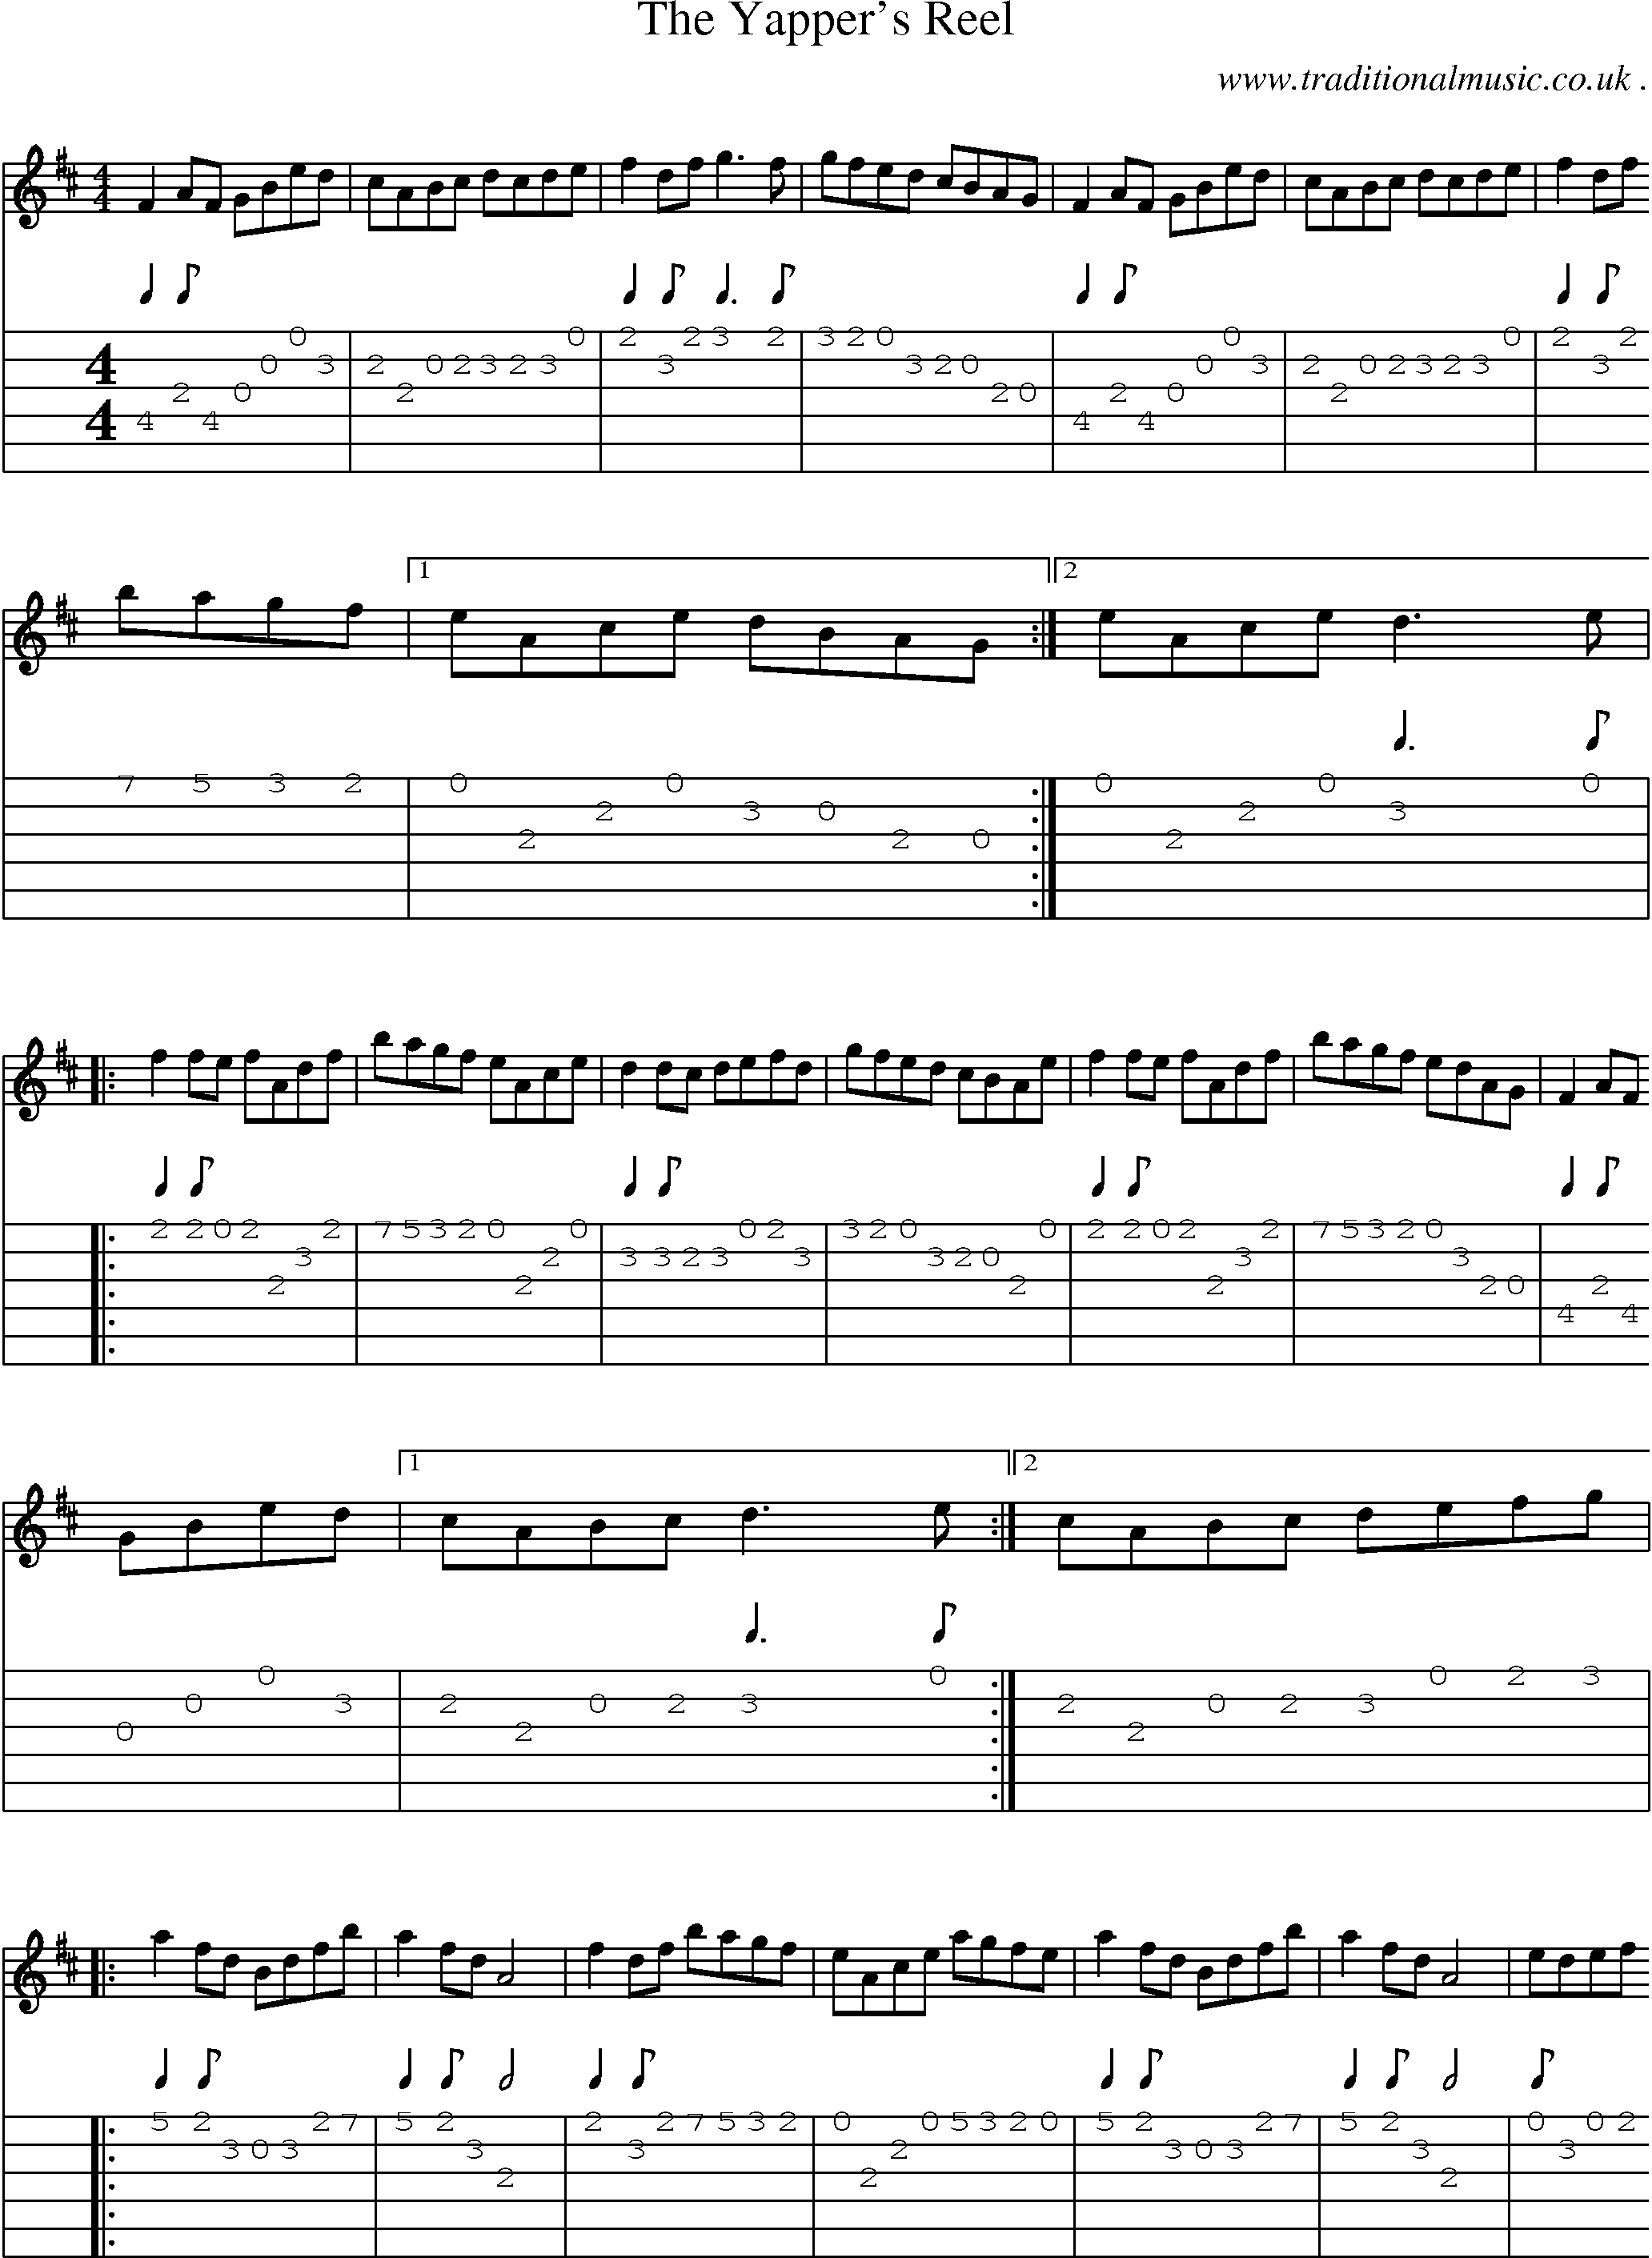 Sheet-Music and Guitar Tabs for The Yappers Reel